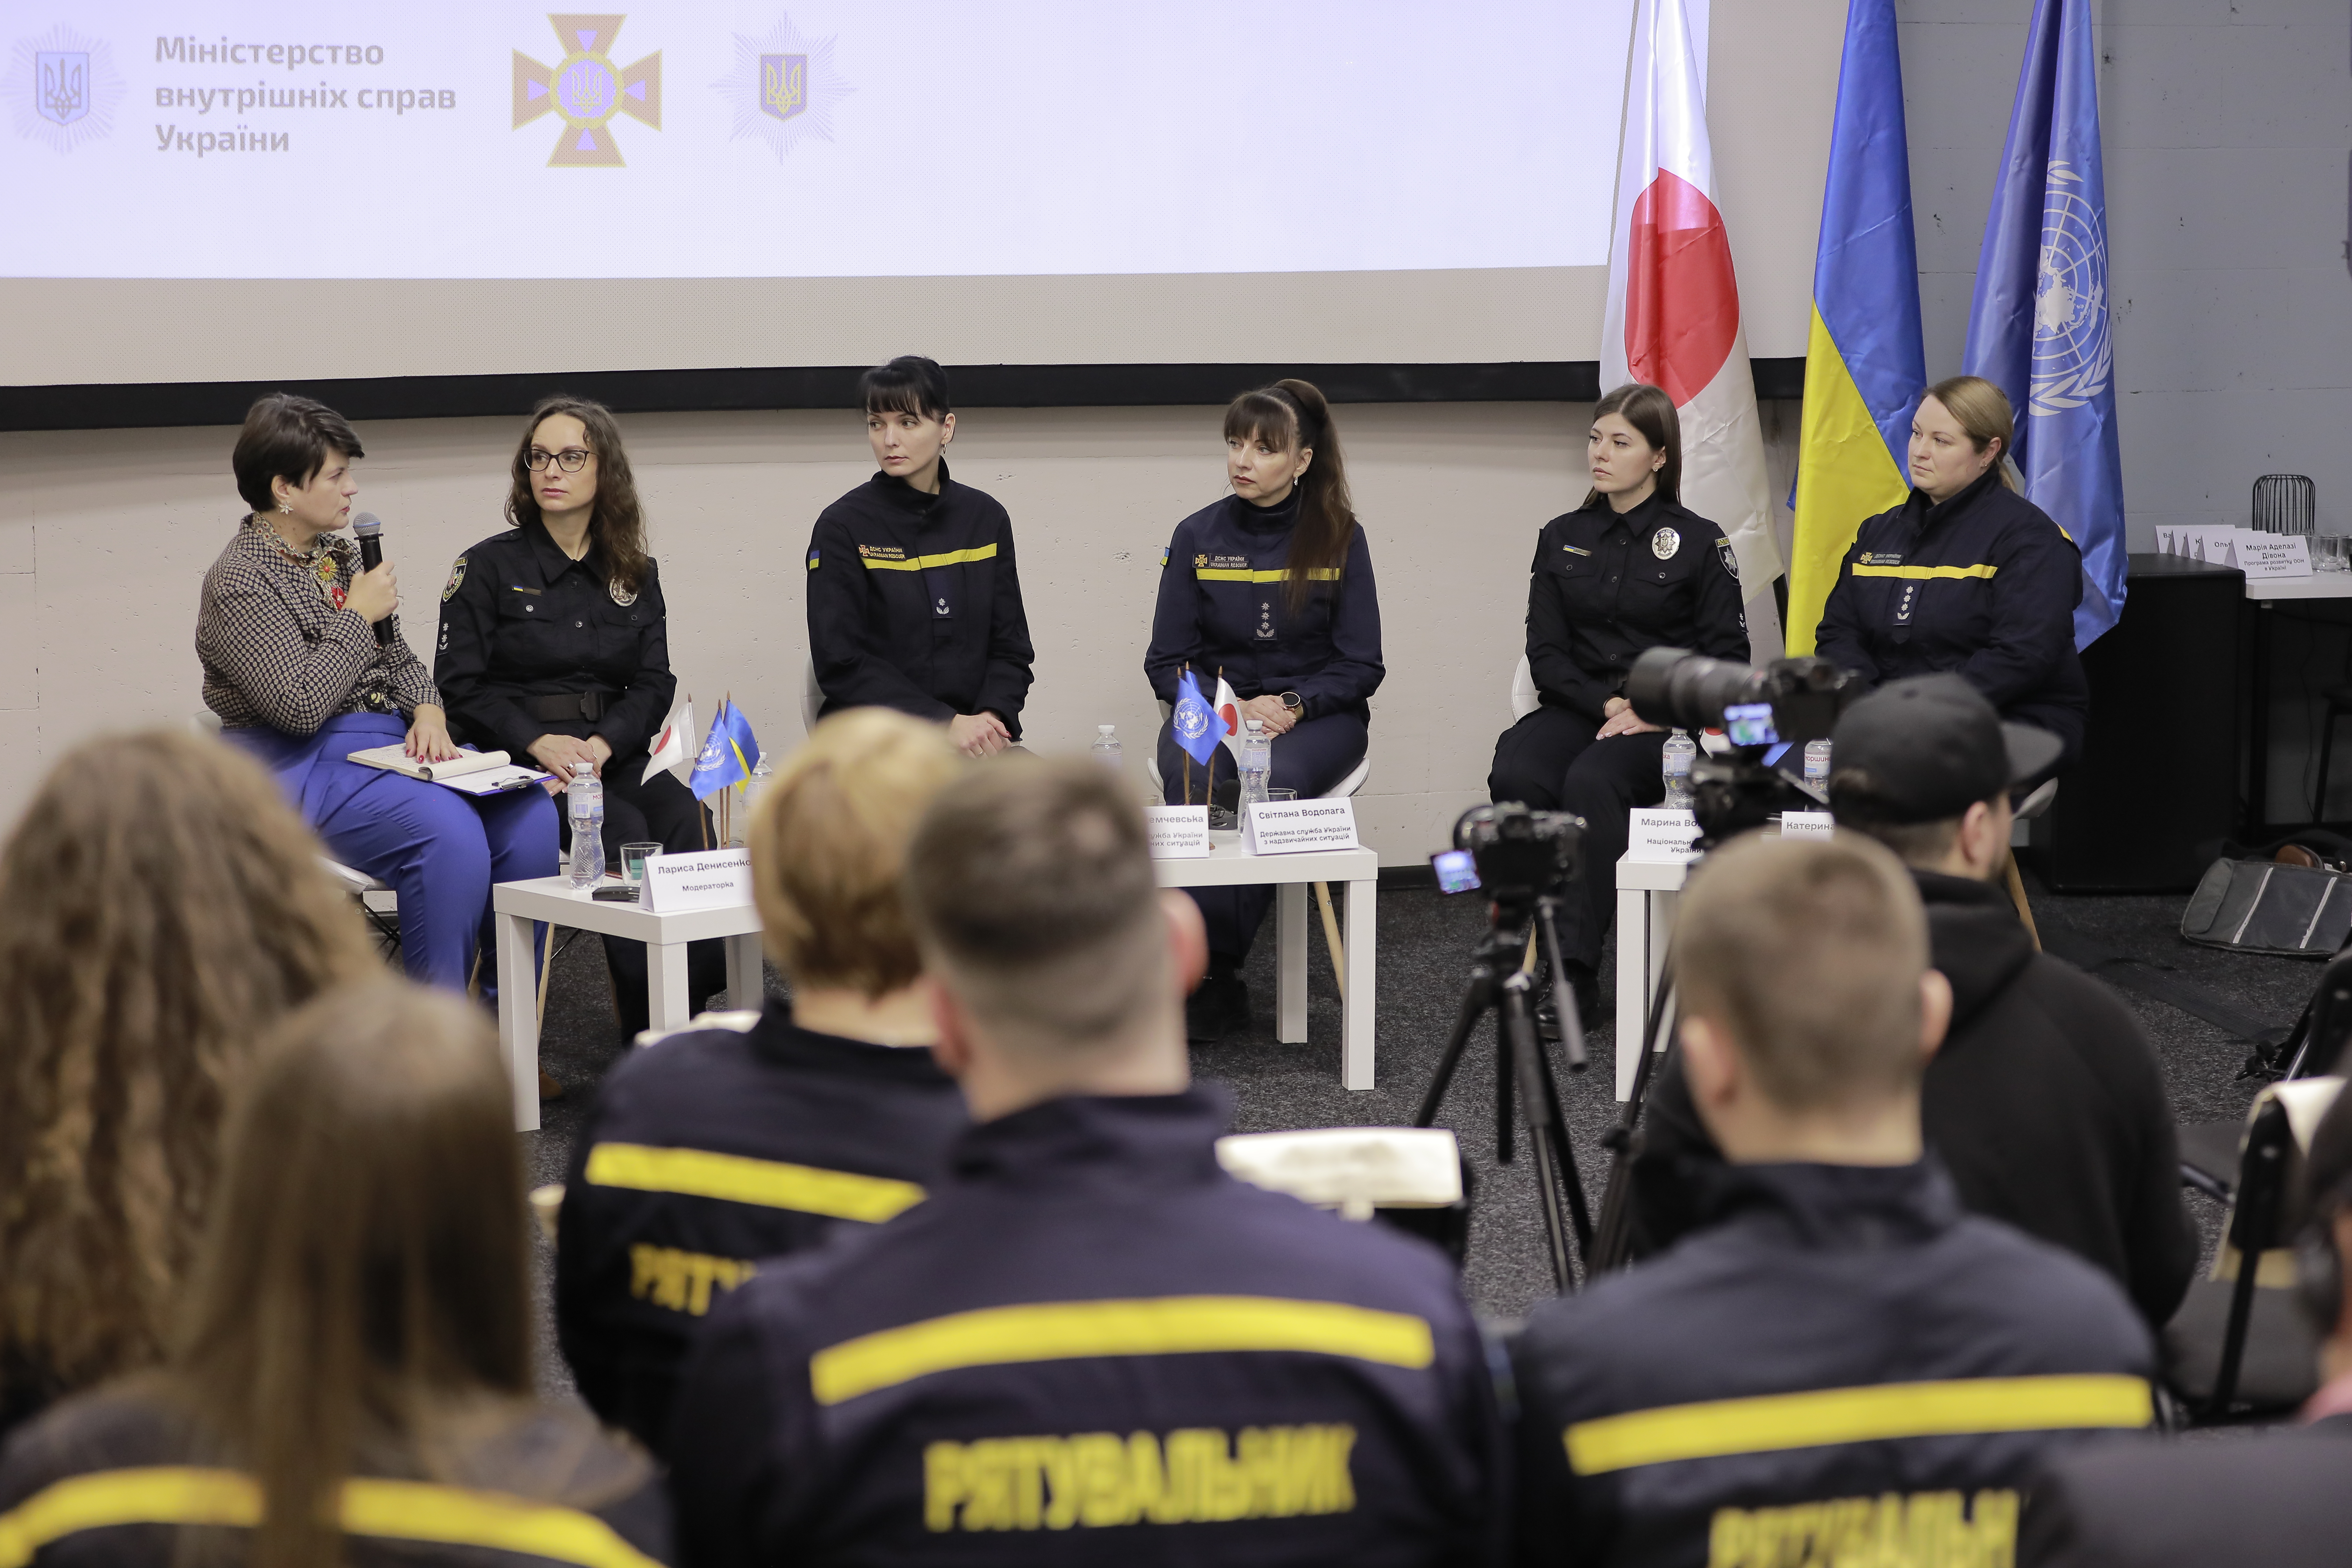 A panel discussion is taking place in a room with a group of women seated in front of an audience. The panelists, some of whom are dressed in black uniforms with yellow trim, are sitting behind a table with name tags and microphones. There are national flags of Ukraine, Japan and the United Nations behind them. In the foreground, the back of the audience is visible, mostly consisting of individuals wearing jackets with "Rescuer" inscription.